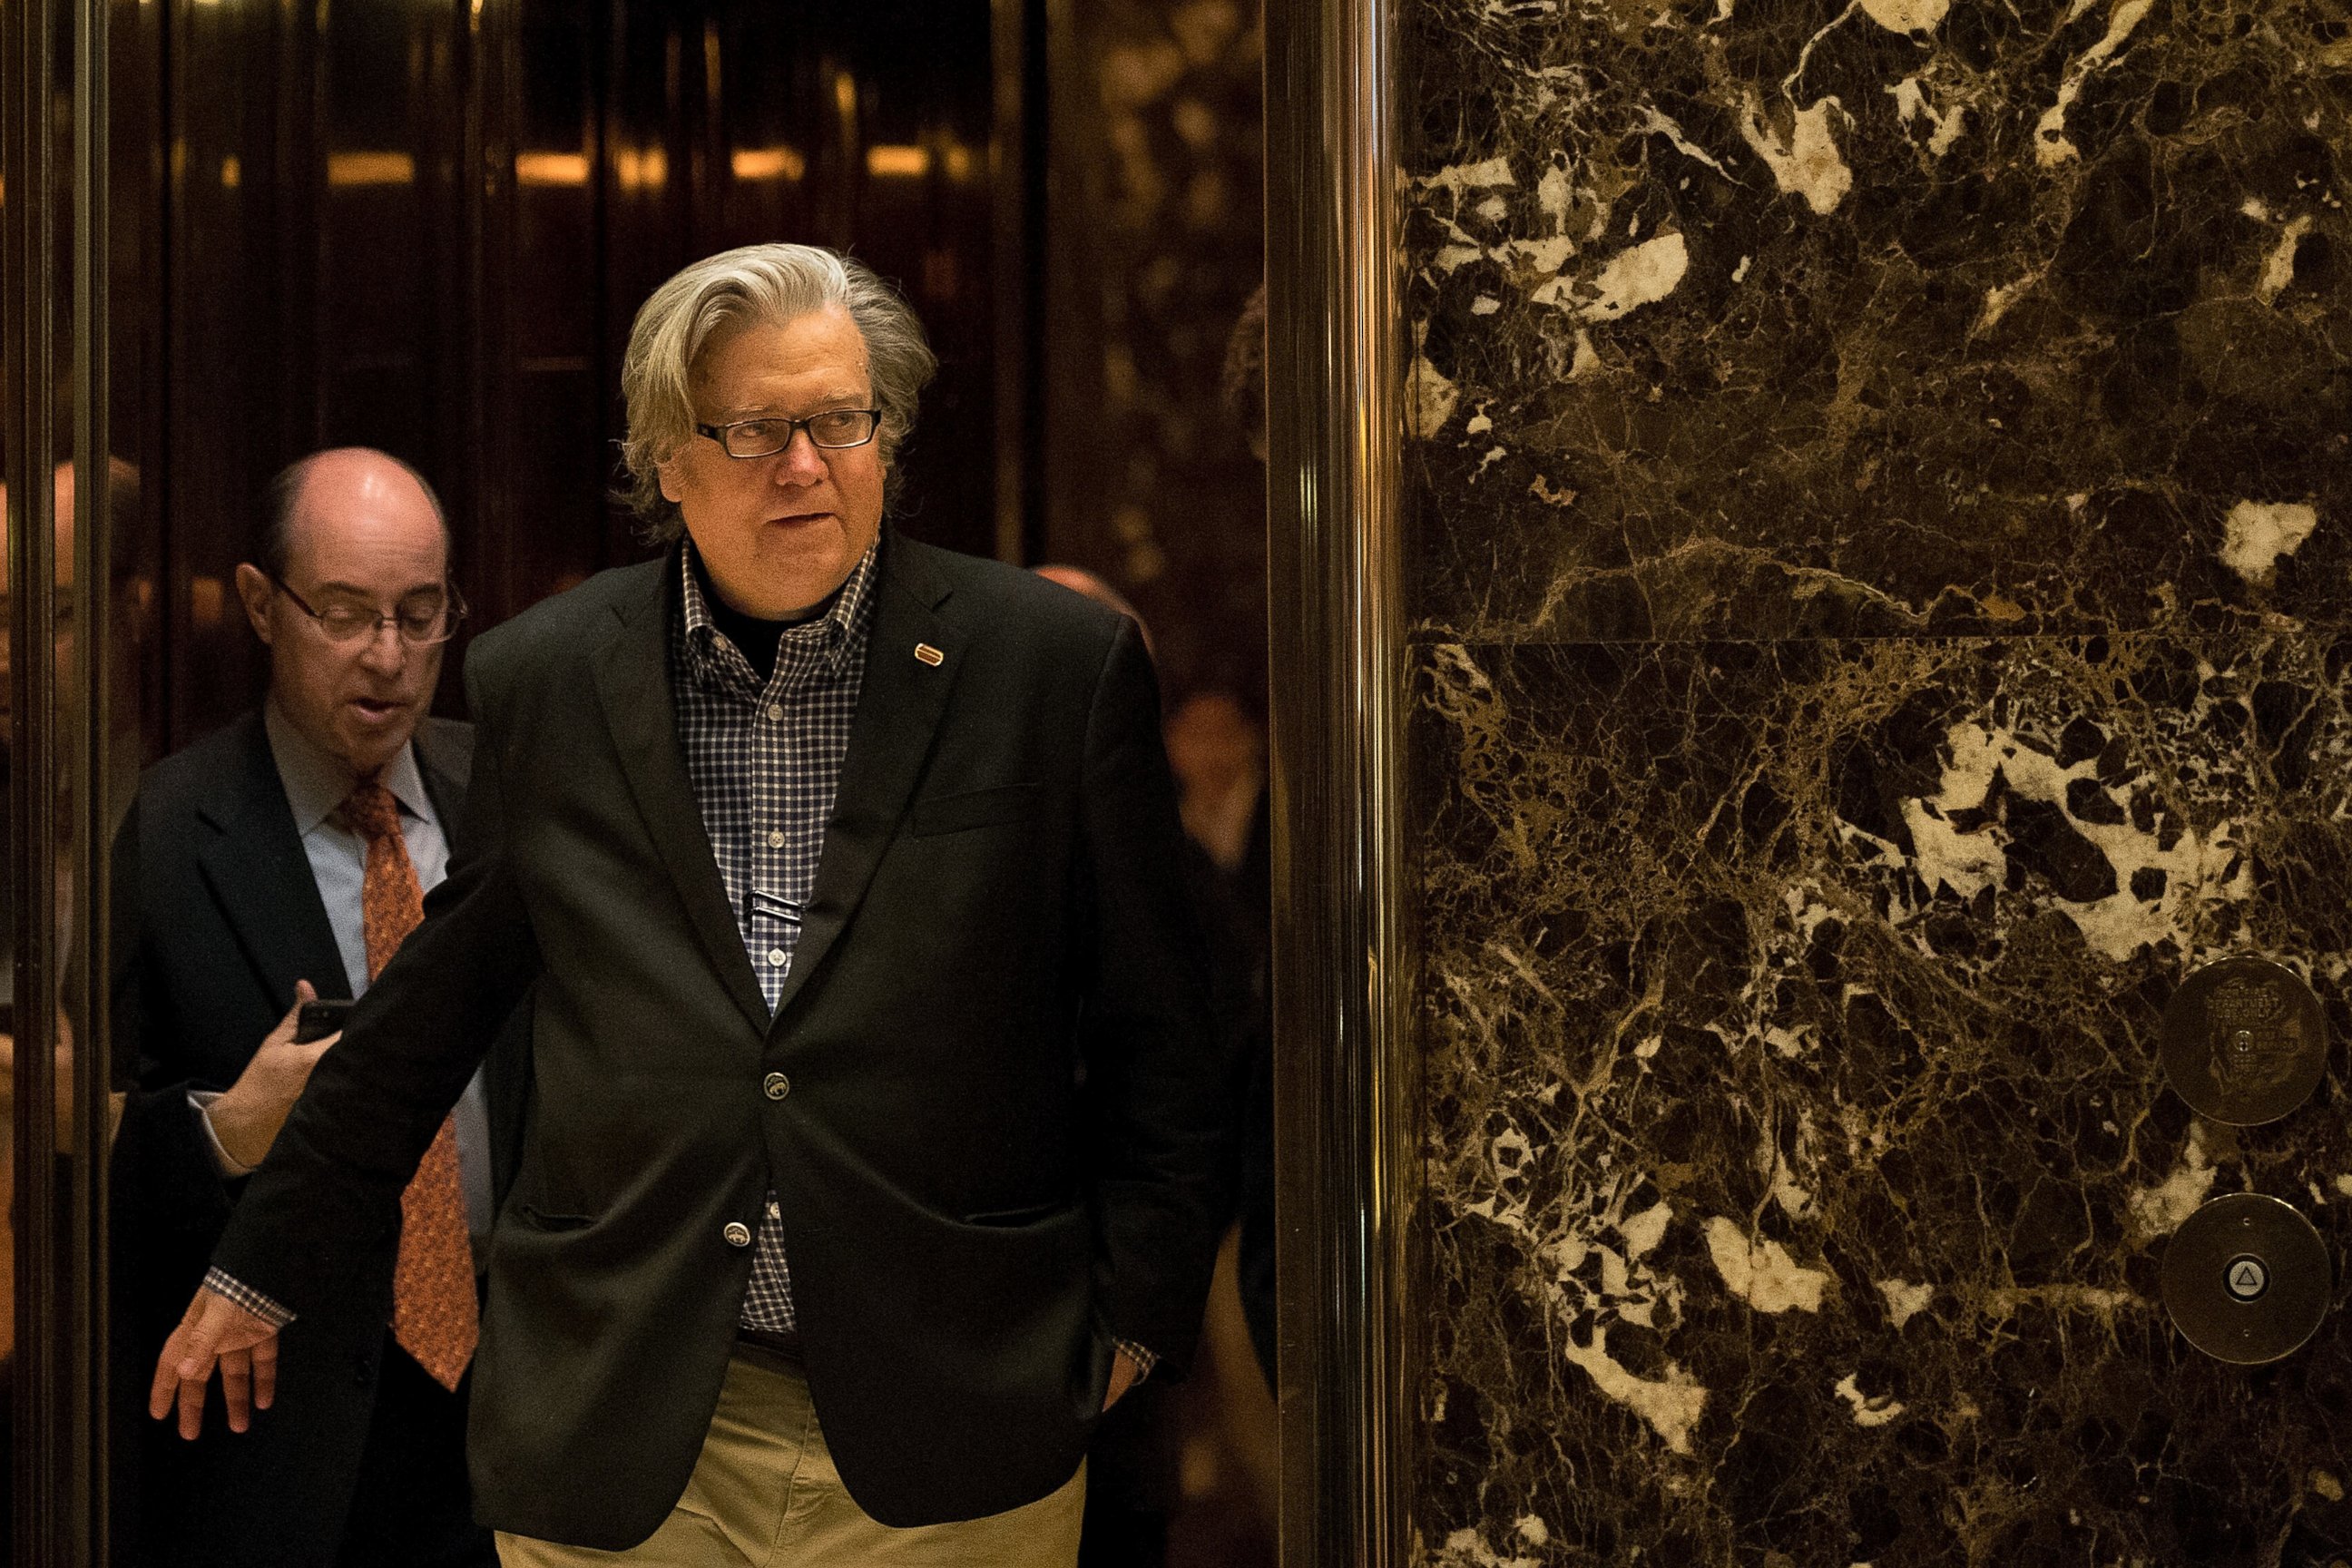 PHOTO: Steve Bannon exits an elevator in the lobby of Trump Tower, Nov. 11, 2016, in New York.